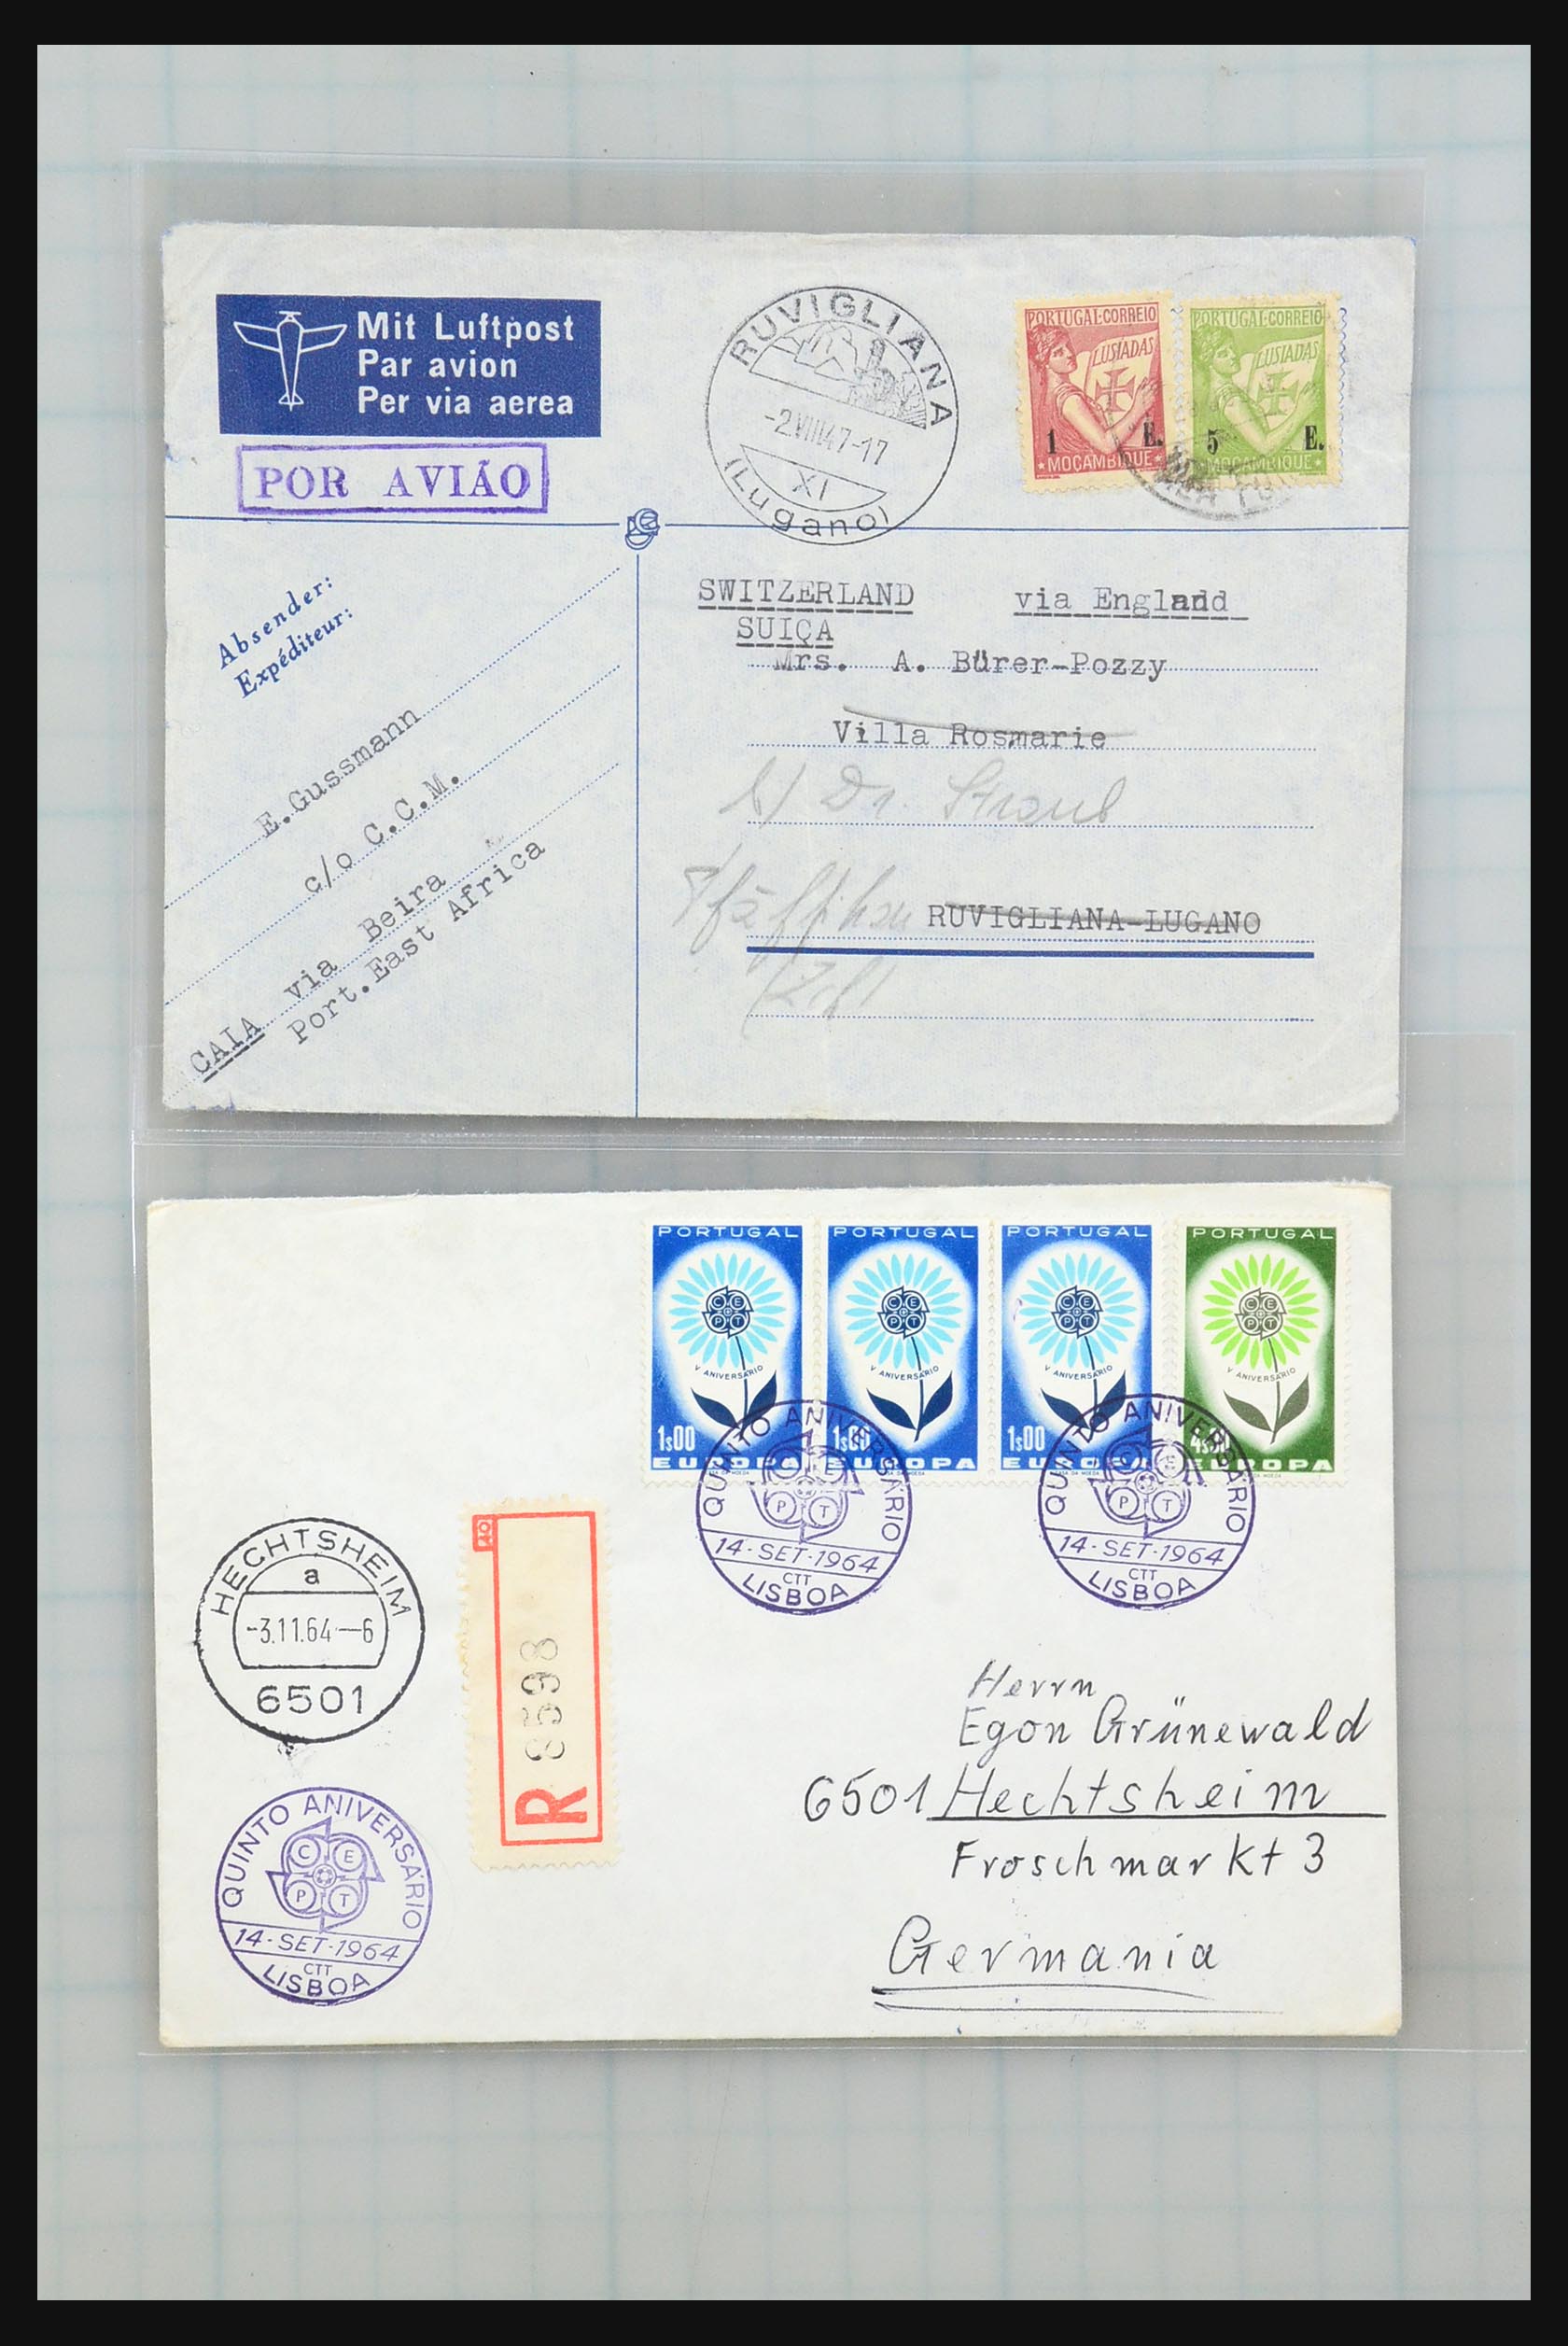 31358 224 - 31358 Portugal/Luxemburg/Greece covers 1880-1960.